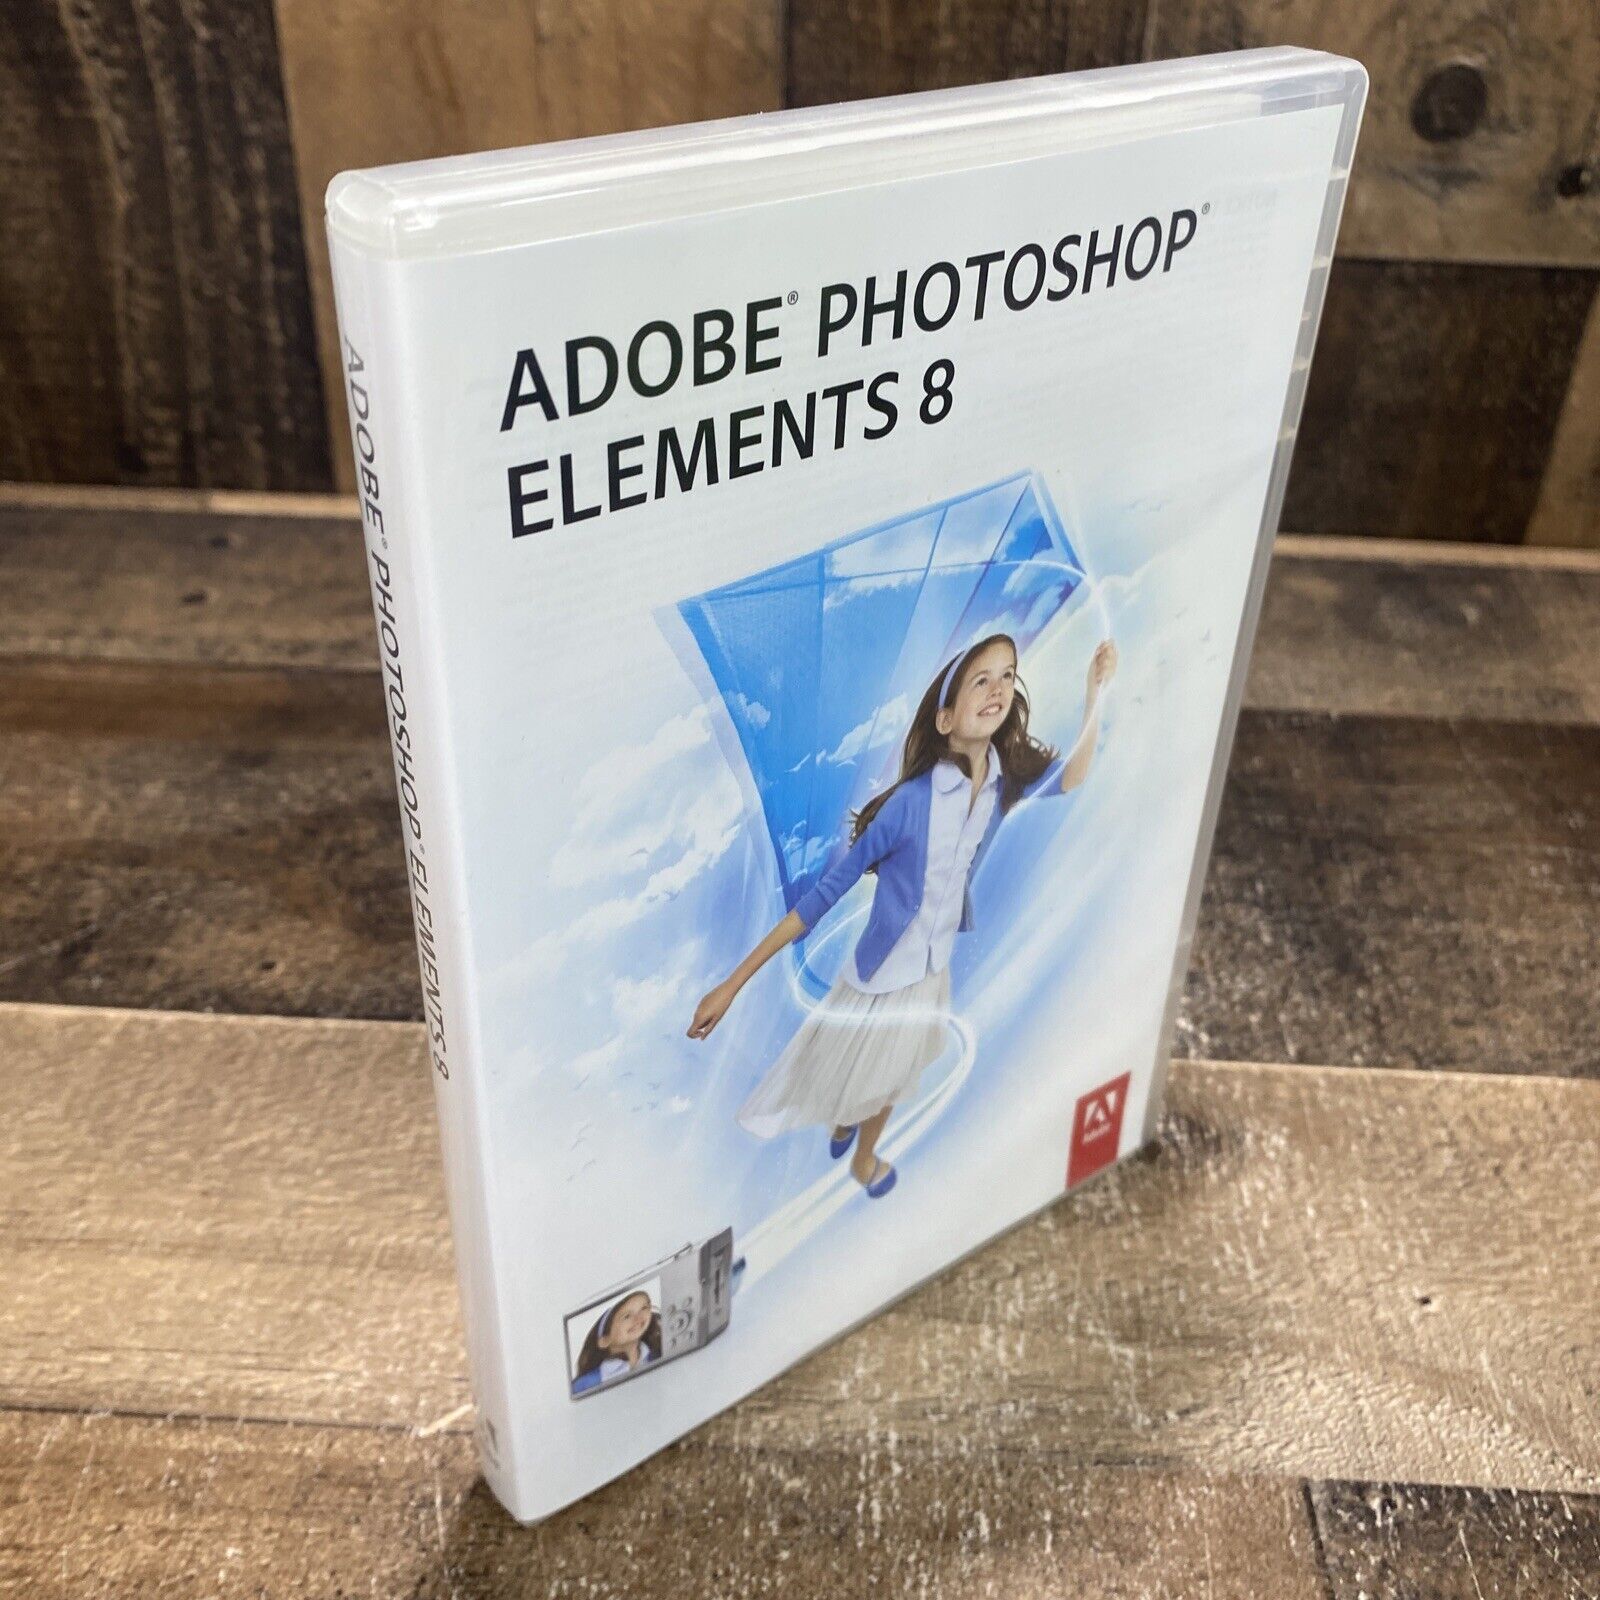 Adobe Photoshop Elements 8 Software Disc In Case w/ Serial Number